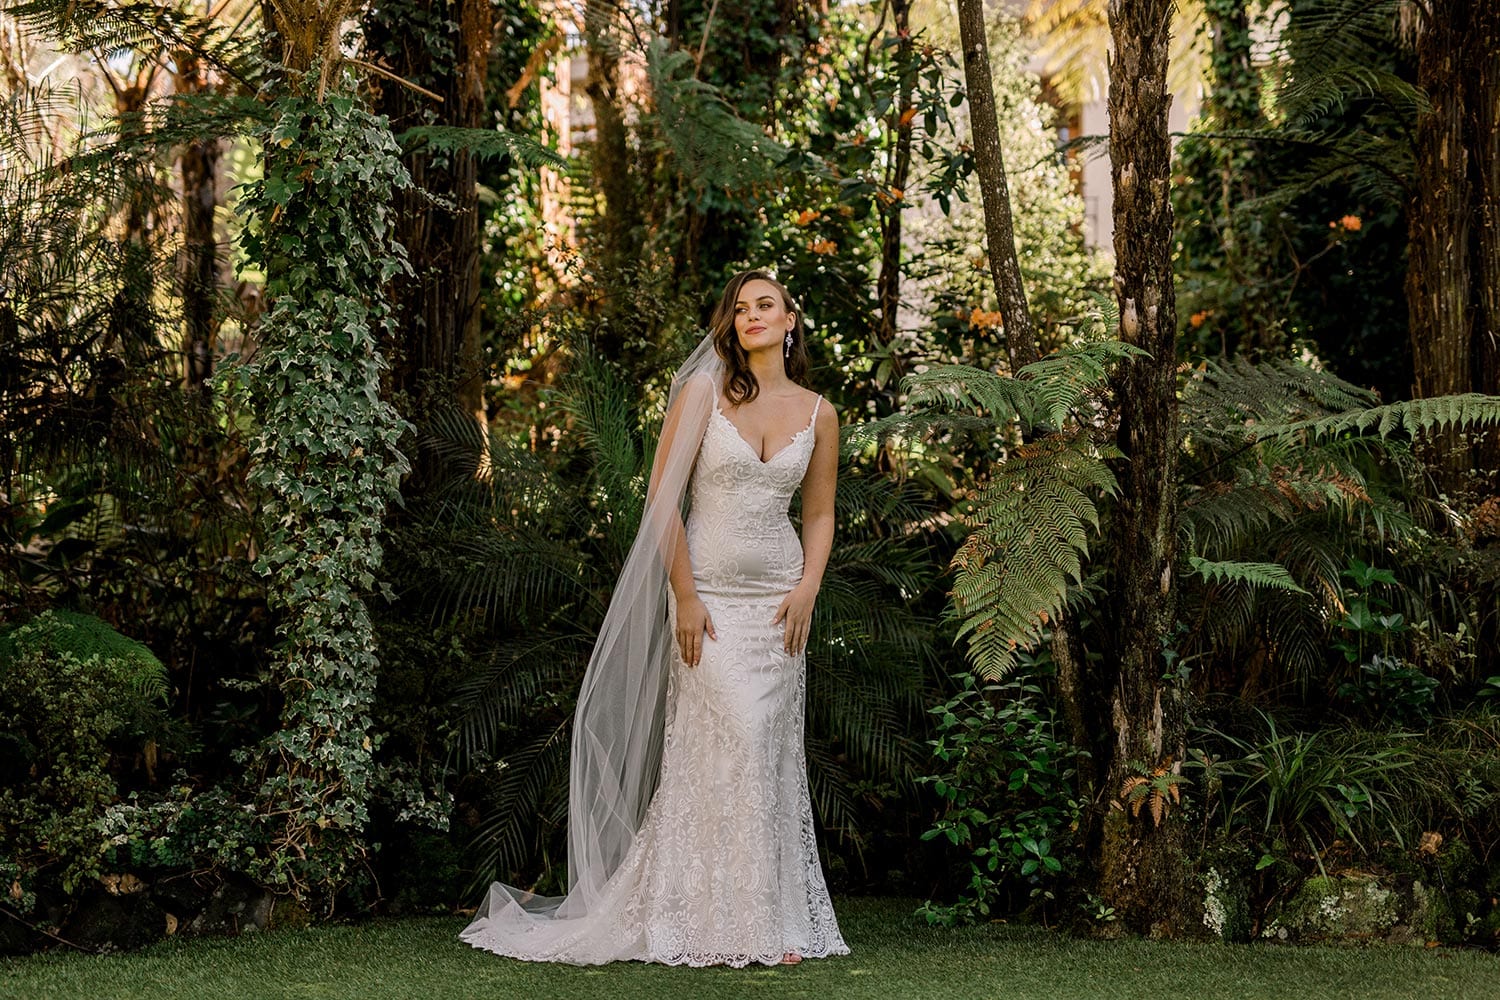 Sahara Wedding Dress from Vinka Design. Stunning fitted lace wedding gown. Lightly-beaded floral lace highlights the ivory stretch satin base. Sweetheart neckline & low back with beautiful lace detail. Full length of dress. Photographed in landscaped gardens.